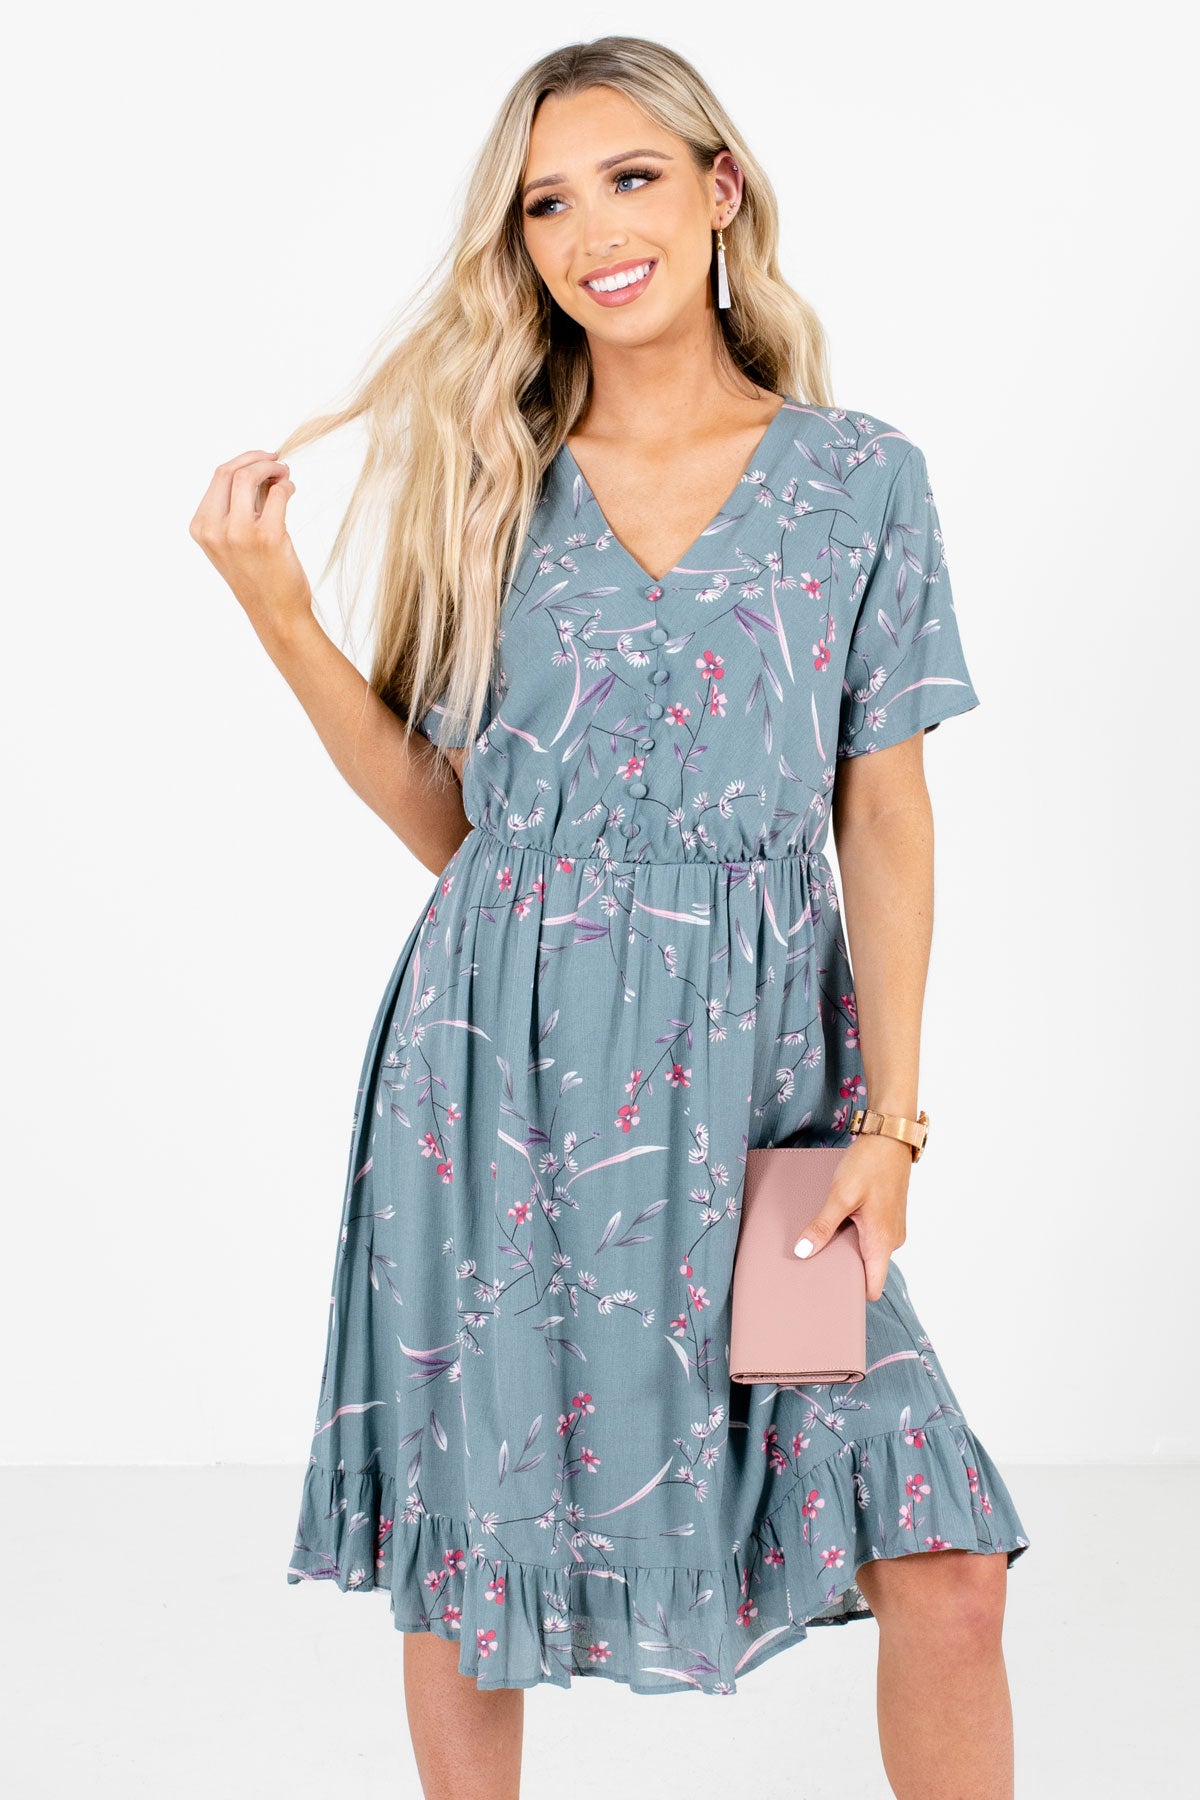 Sage Green Multicolored Floral Patterned Boutique Dresses for Women